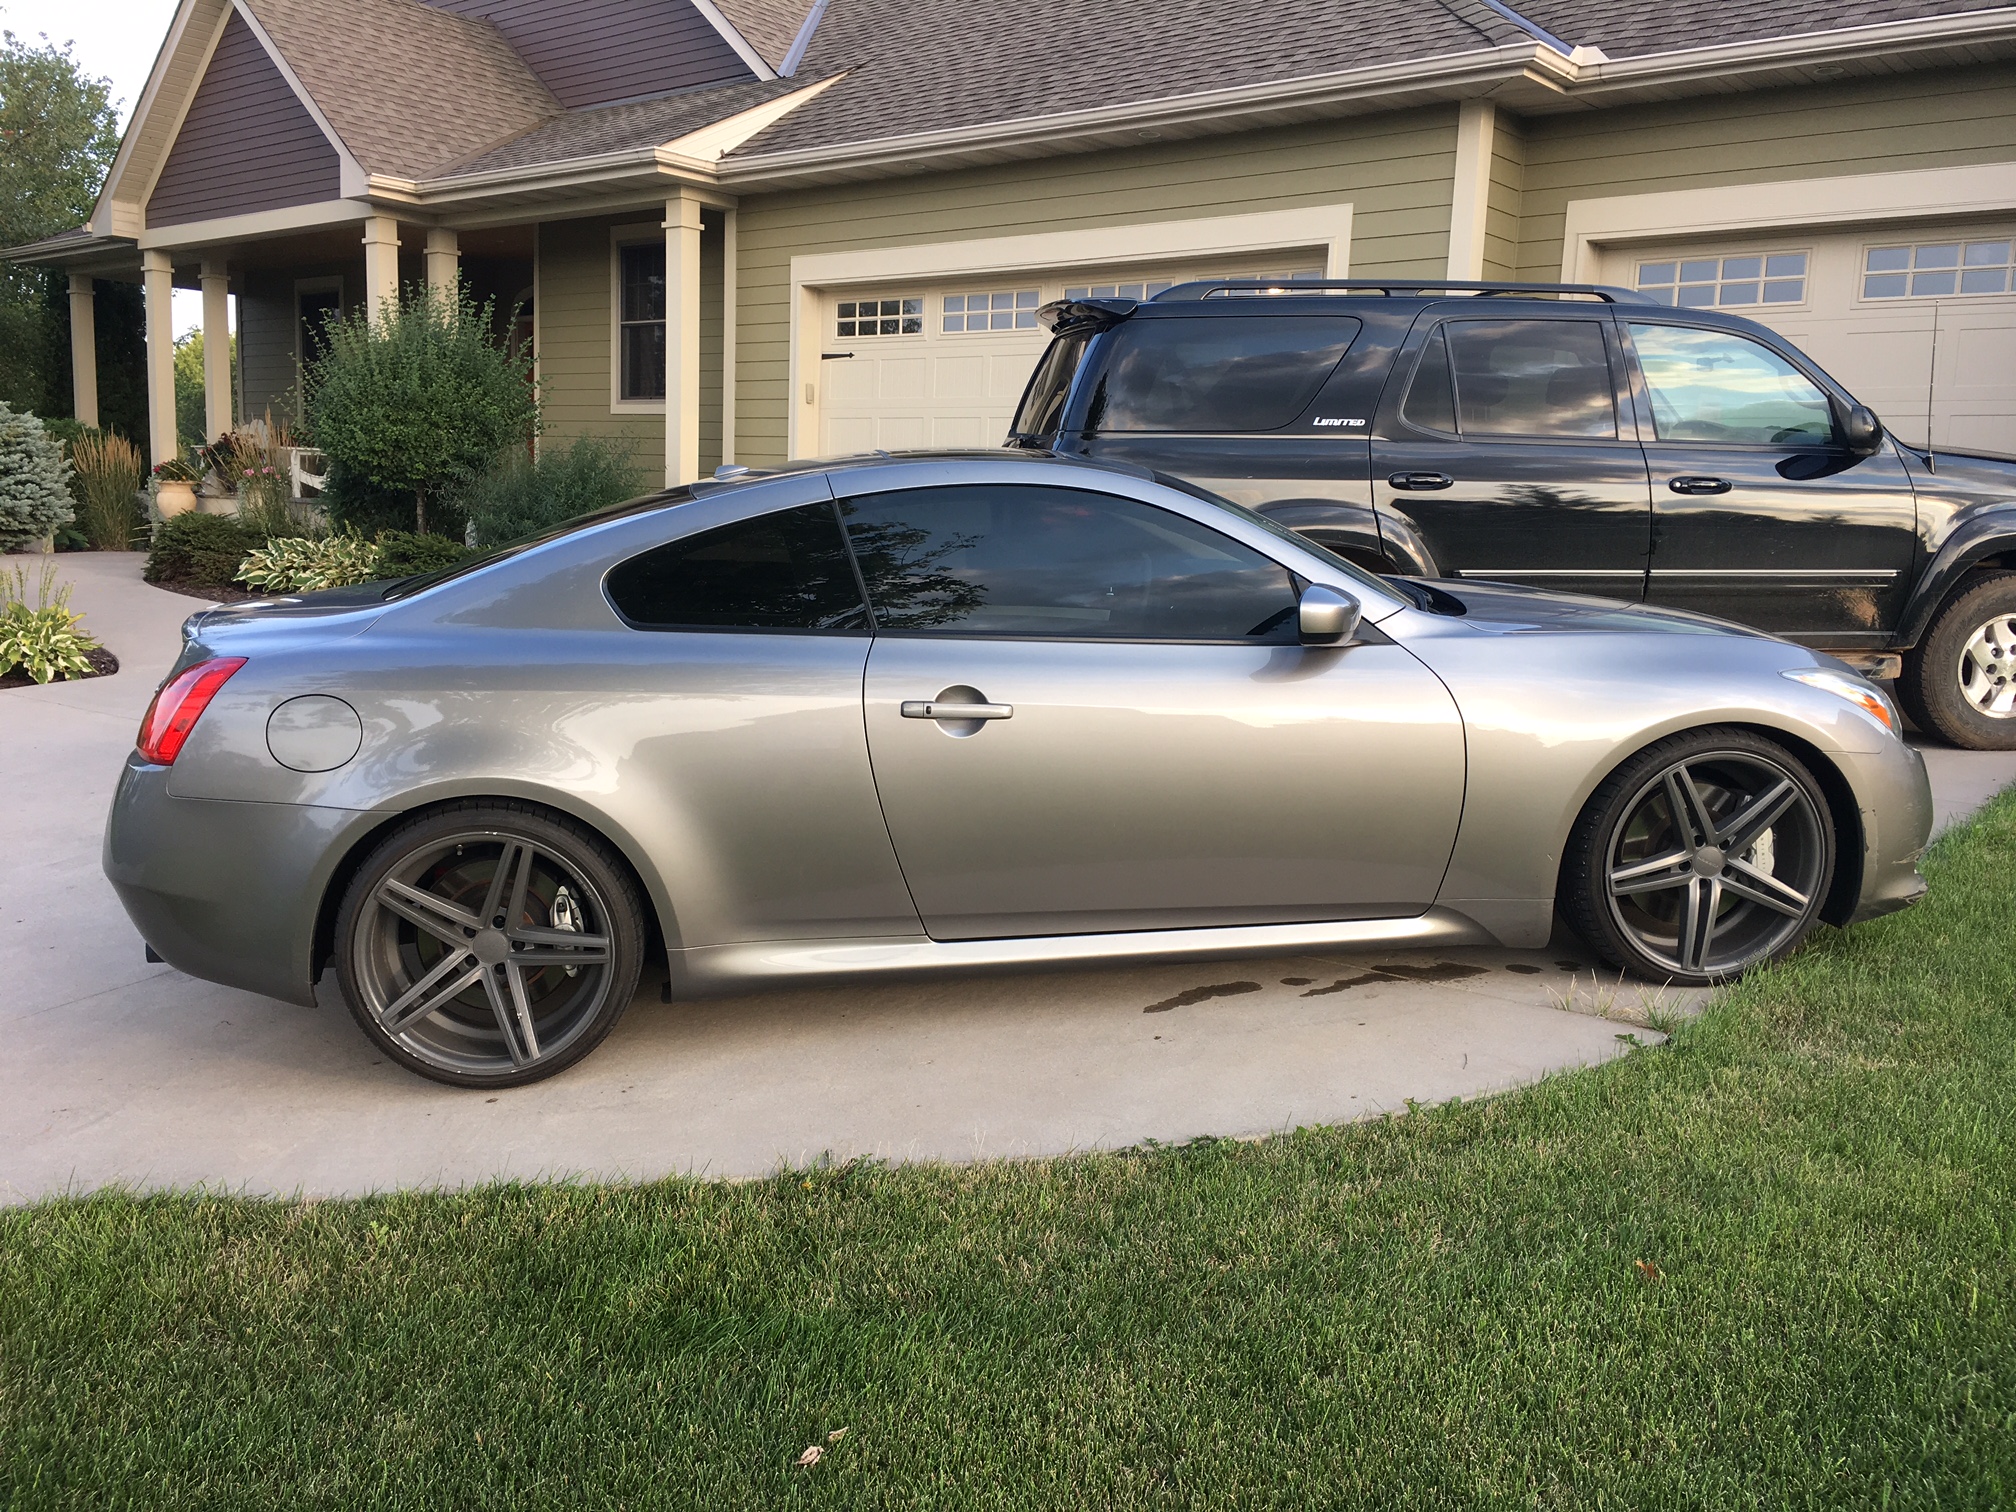 For Sale 2009 Infiniti G37S for sale - Lowered on Vossen CV5 - MyG37